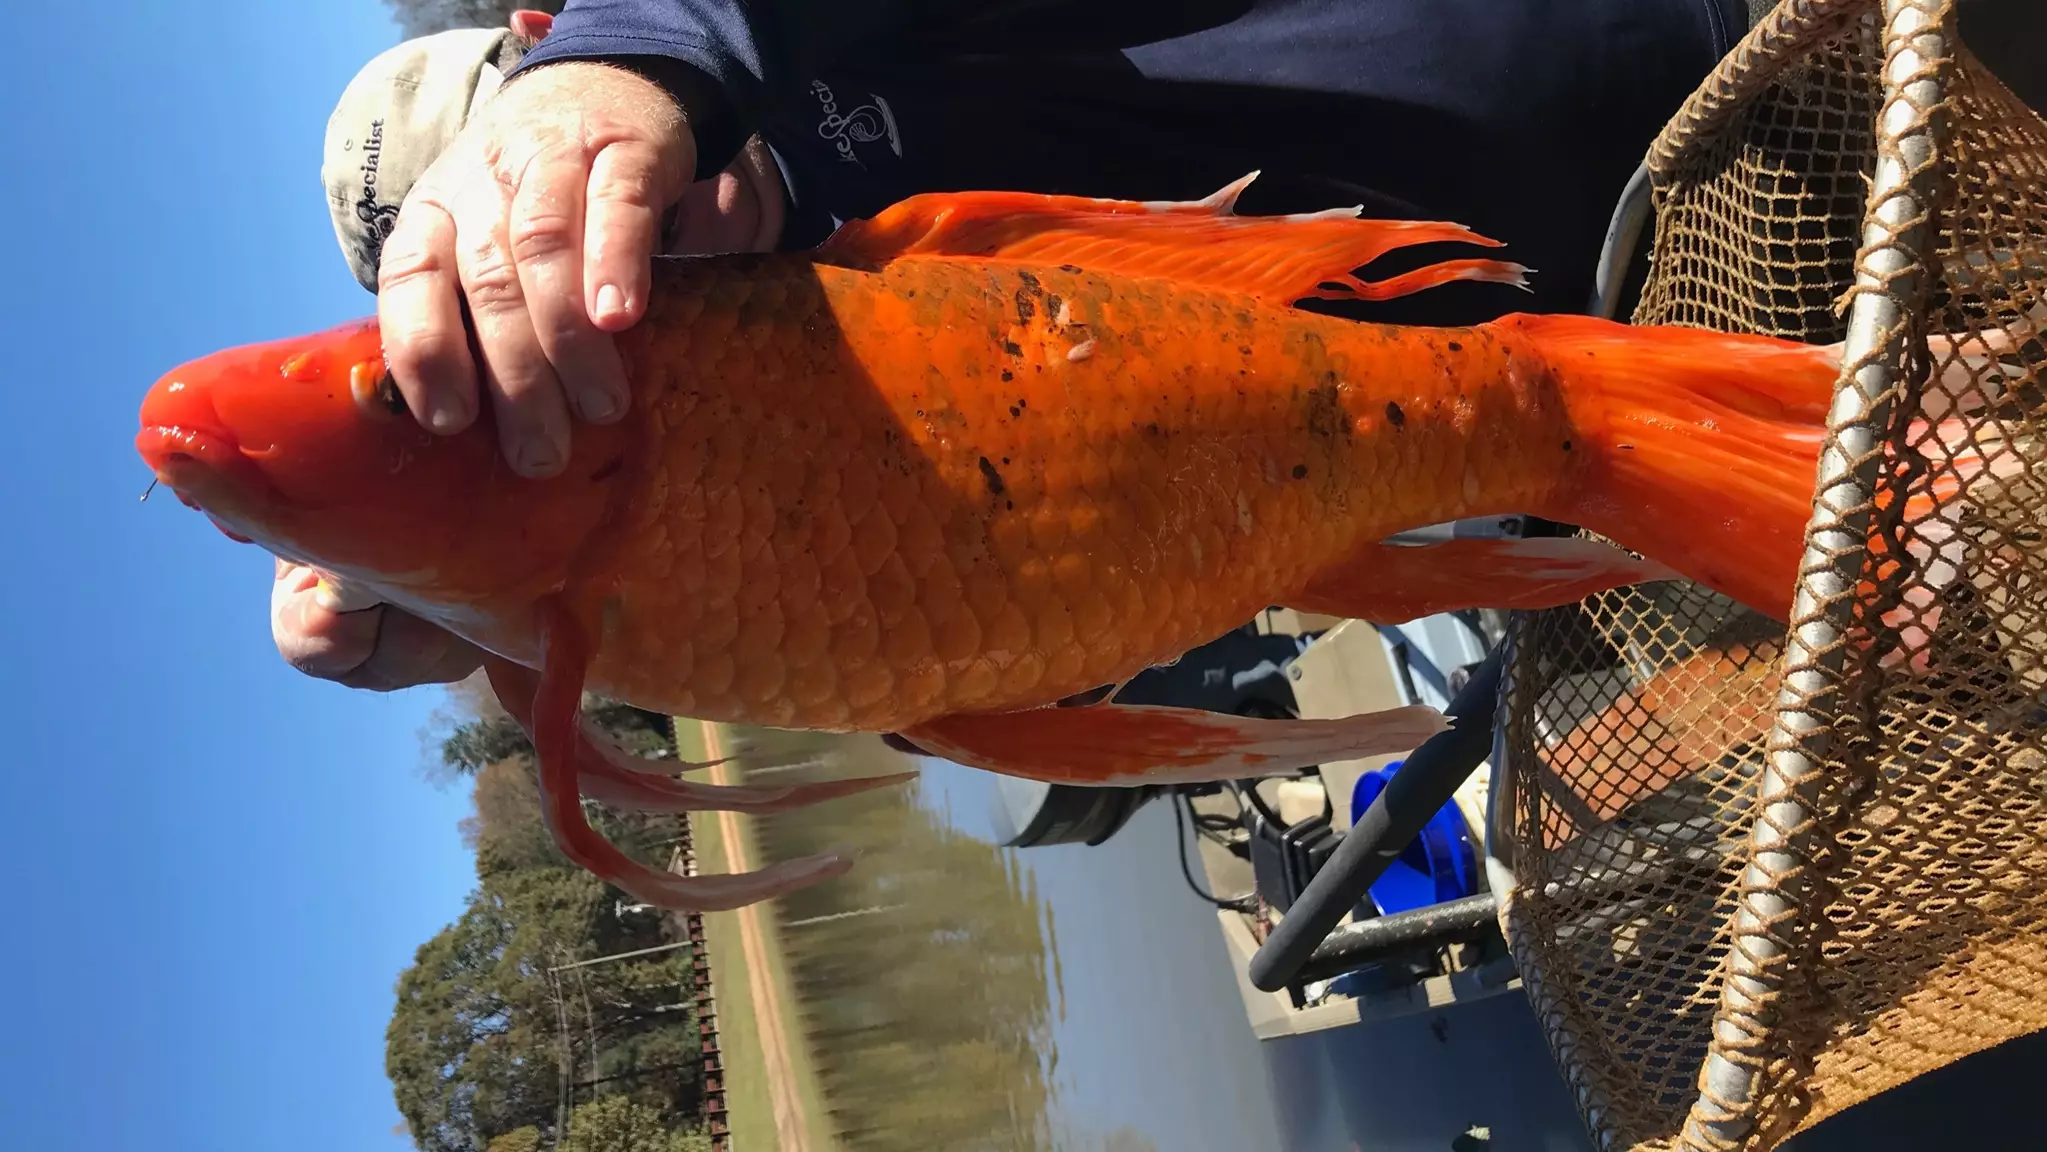 Fisherman Catches 9lb 'Goldfish' 15 Times The Average Size In Lake